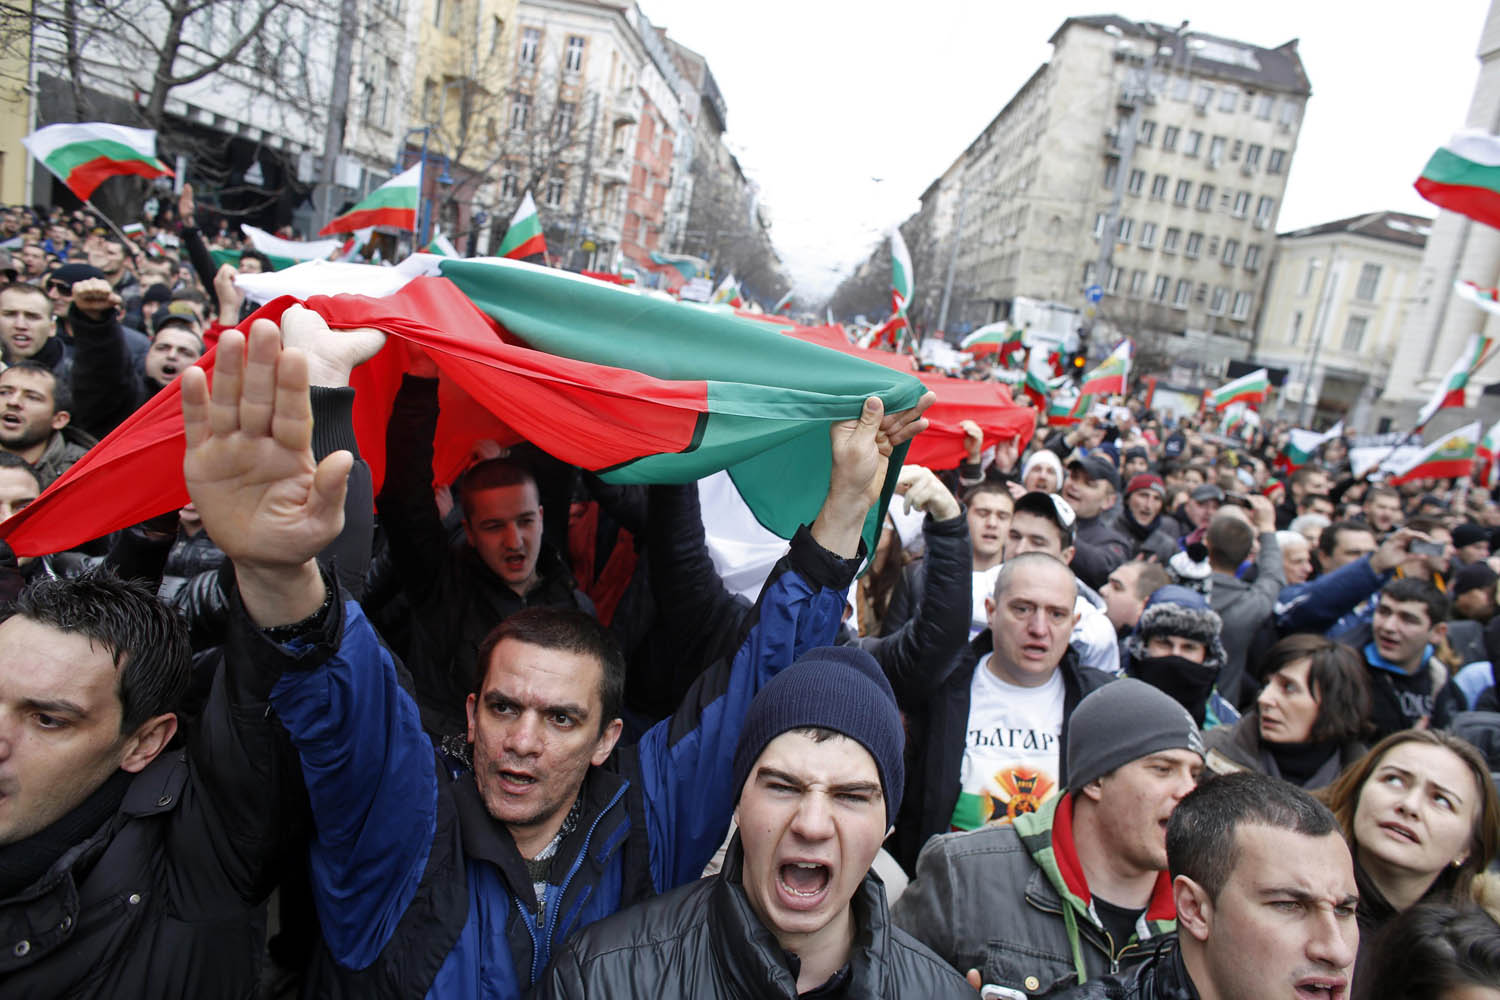 Thousands of demonstrators march shouting slogans during a protest against high utility bills and monopolies in the energy sector in Sofia February 24, 2013. Tens of thousands of Bulgarians marched through cities across the Balkan country on Sunday, 